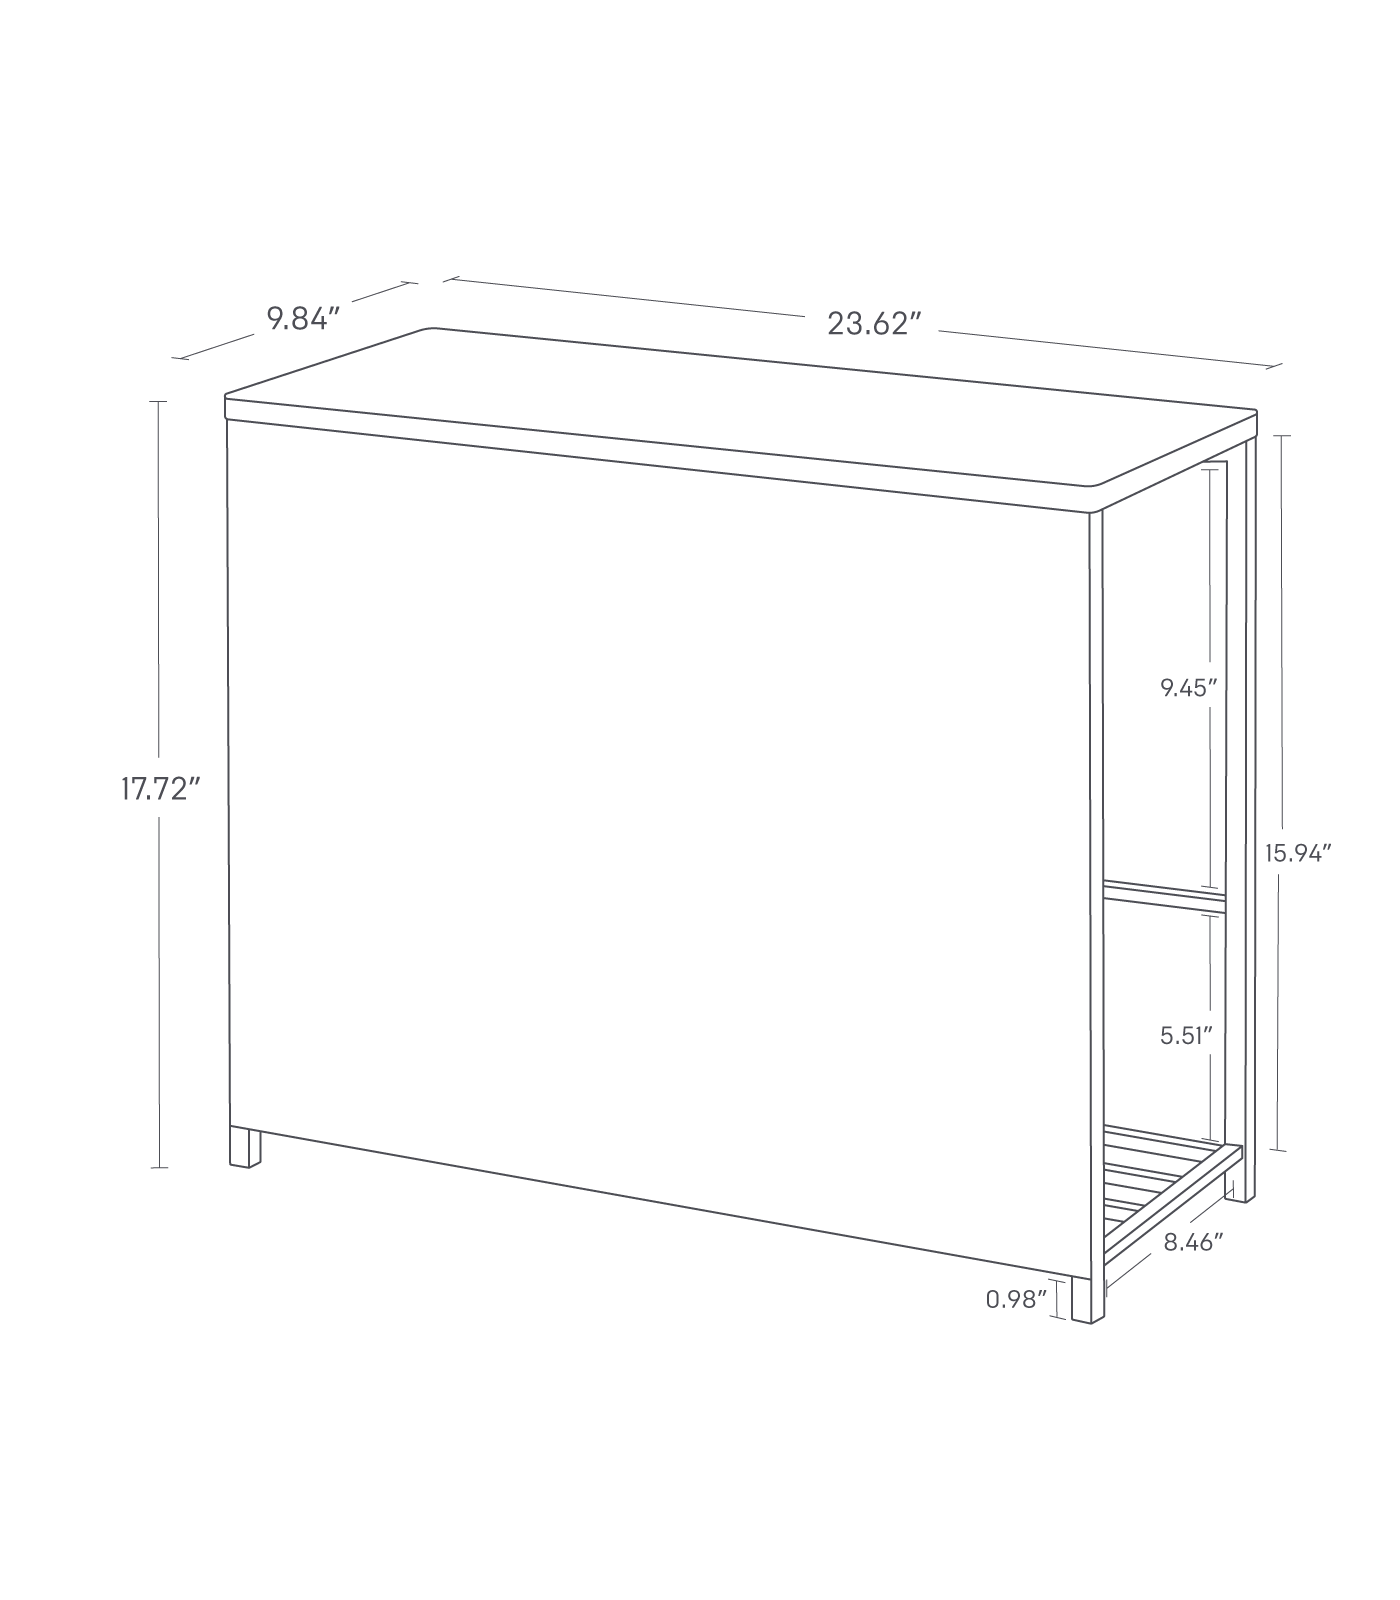 Dimension image for Entryway Storage Organizer showing length of 23.62